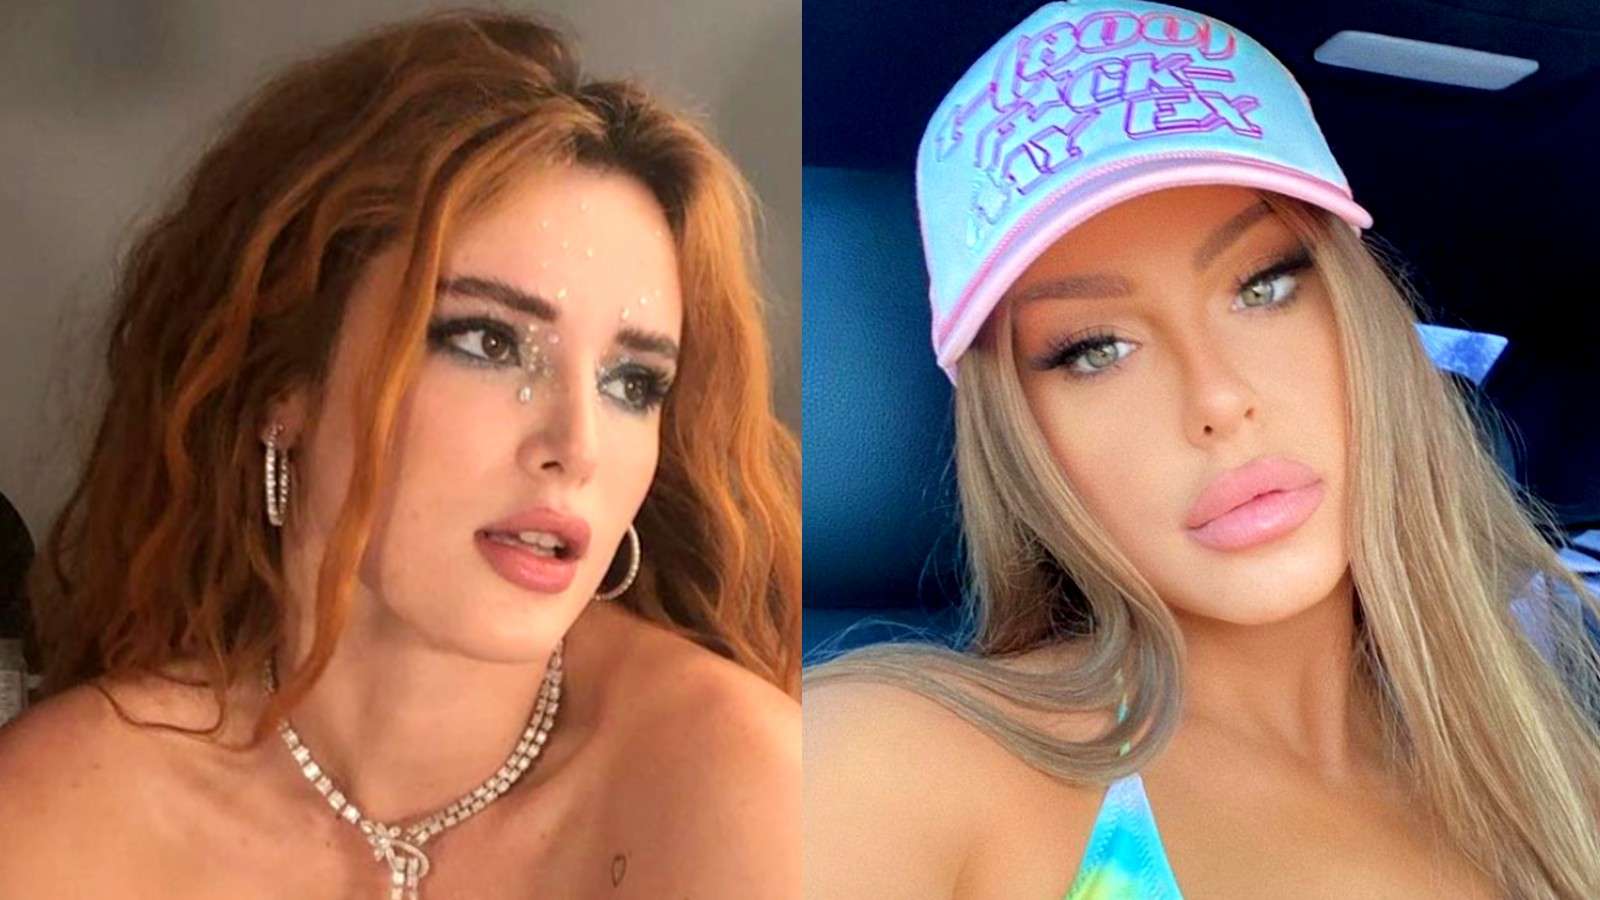 Tana Mongeau and Bella Thorne in side by side images